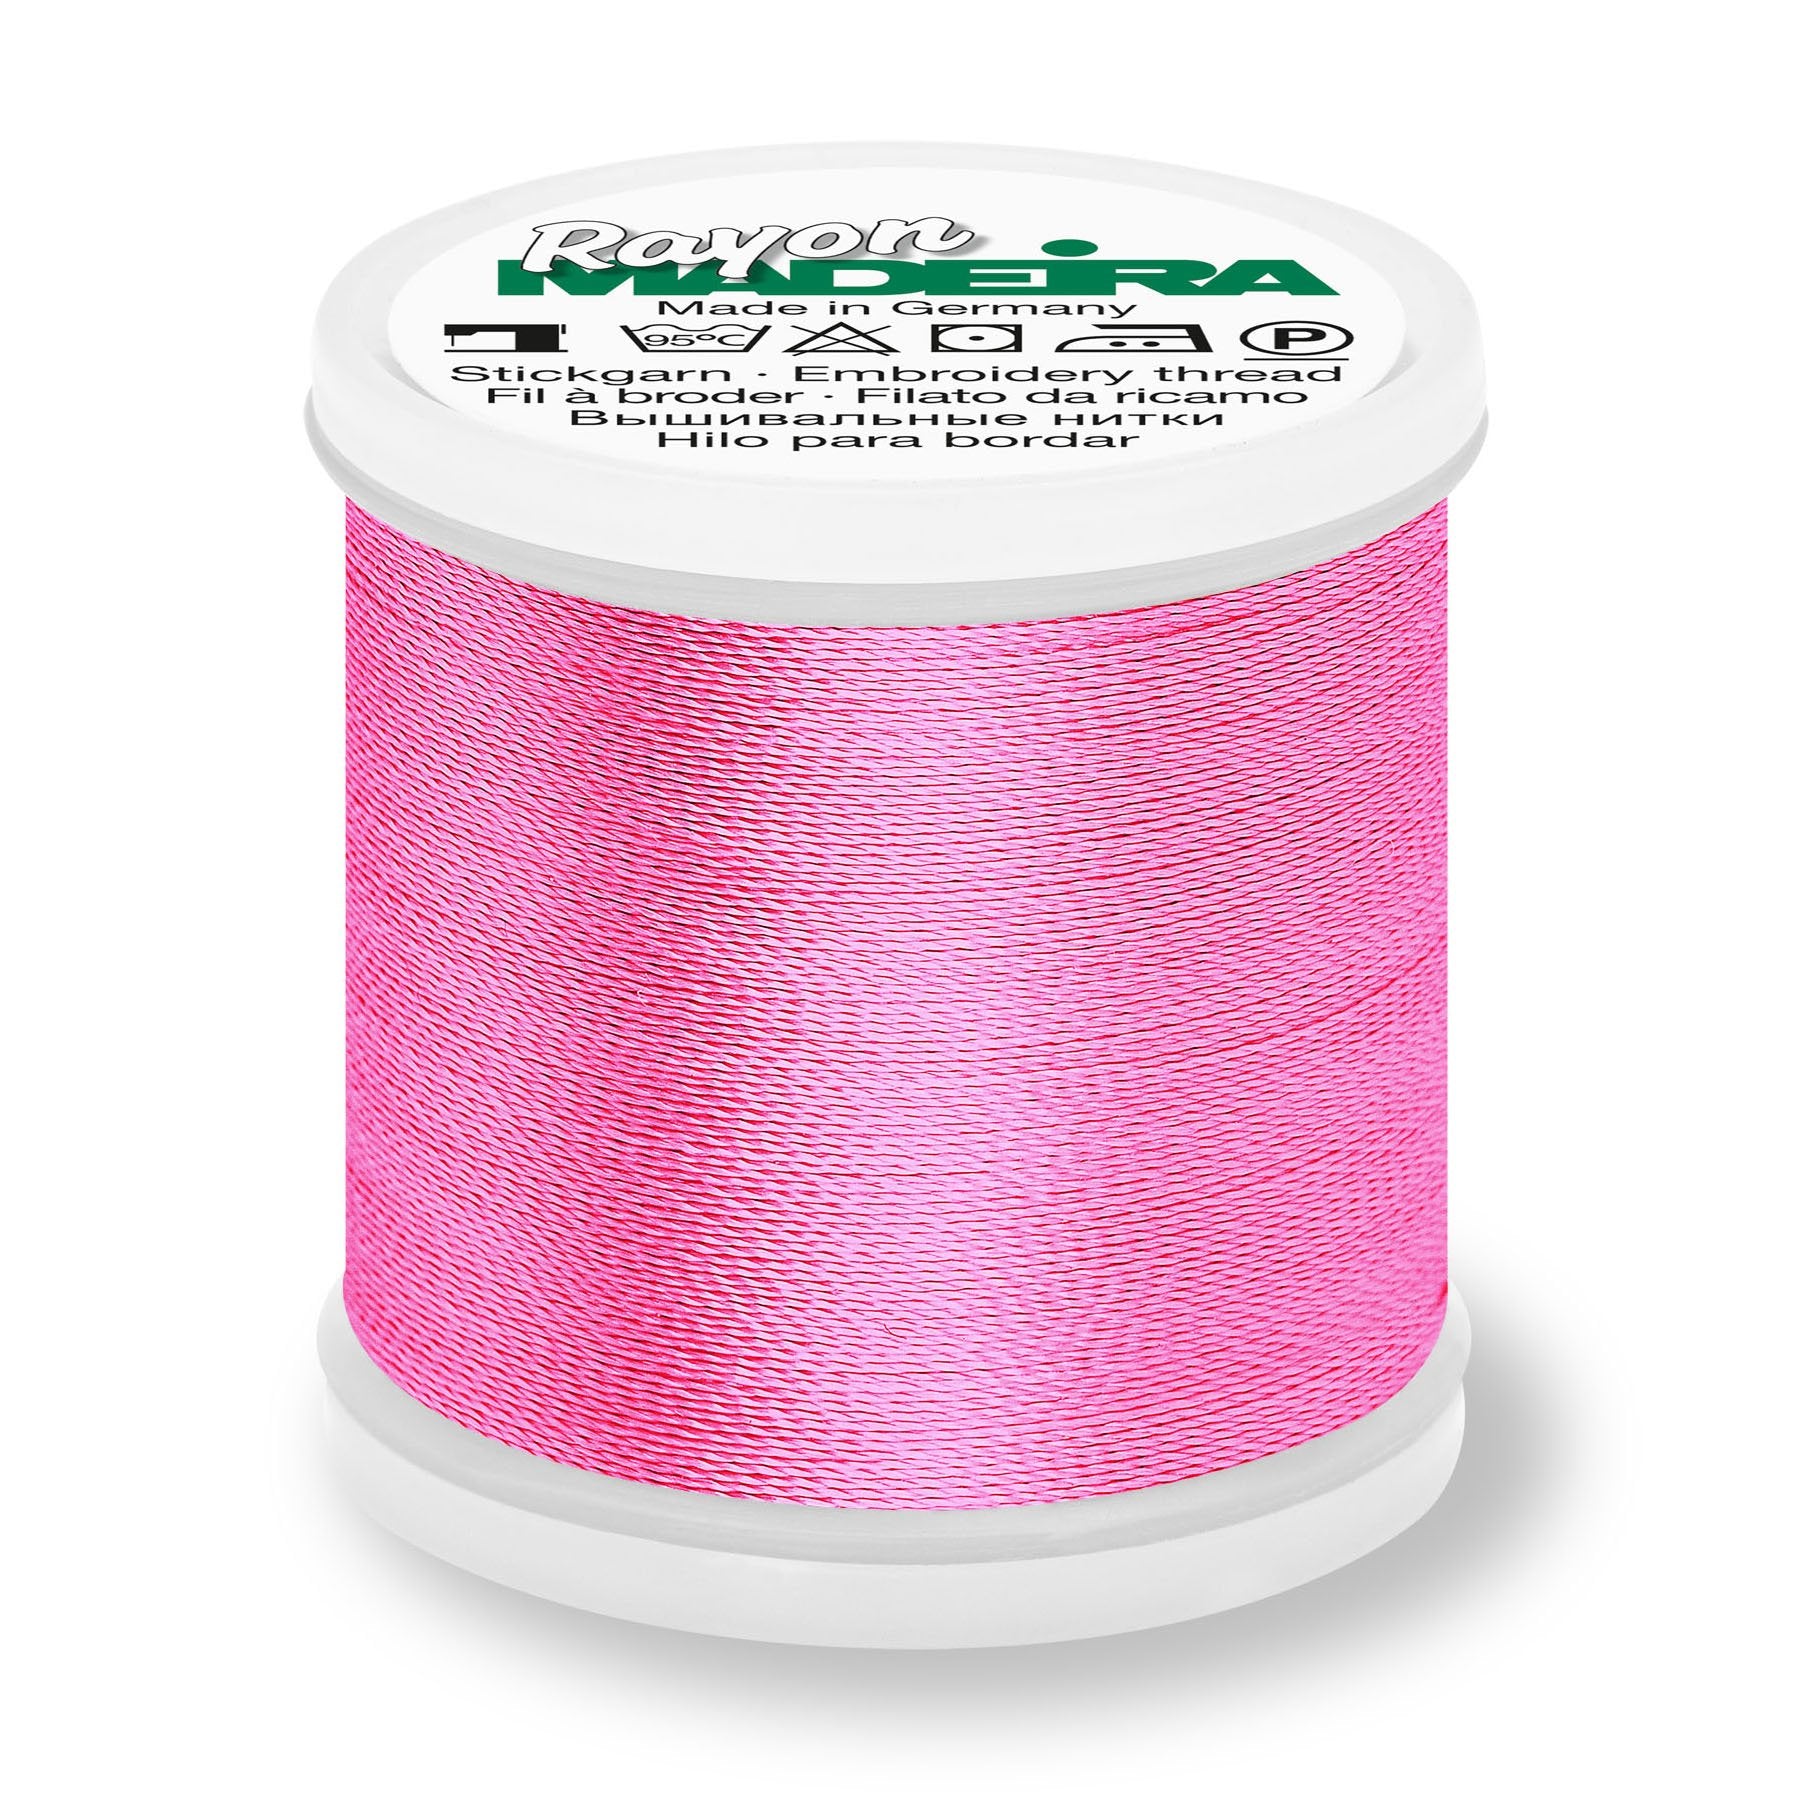 Madeira Rayon 40 Embroidery Thread 200m #1107 Deep Pink from Jaycotts Sewing Supplies